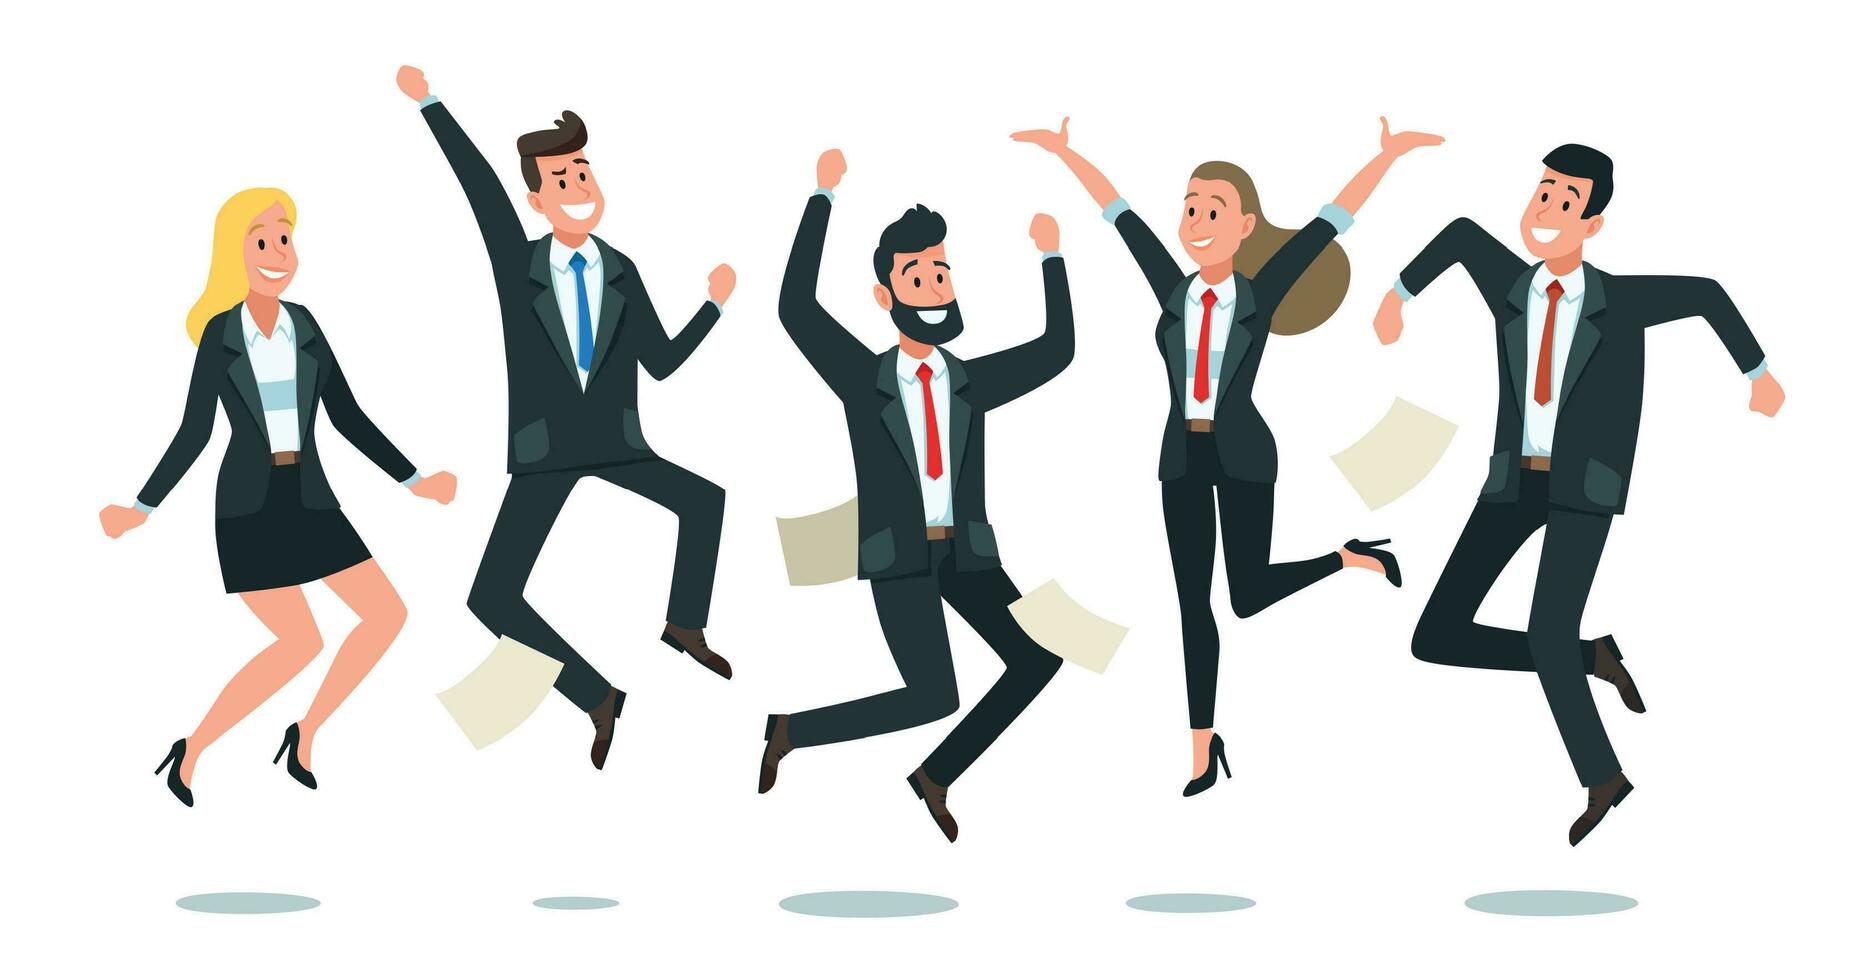 Jumping business team. Office workers jump, happy corporate colleagues jumped together and teamwork fun vector cartoon illustration